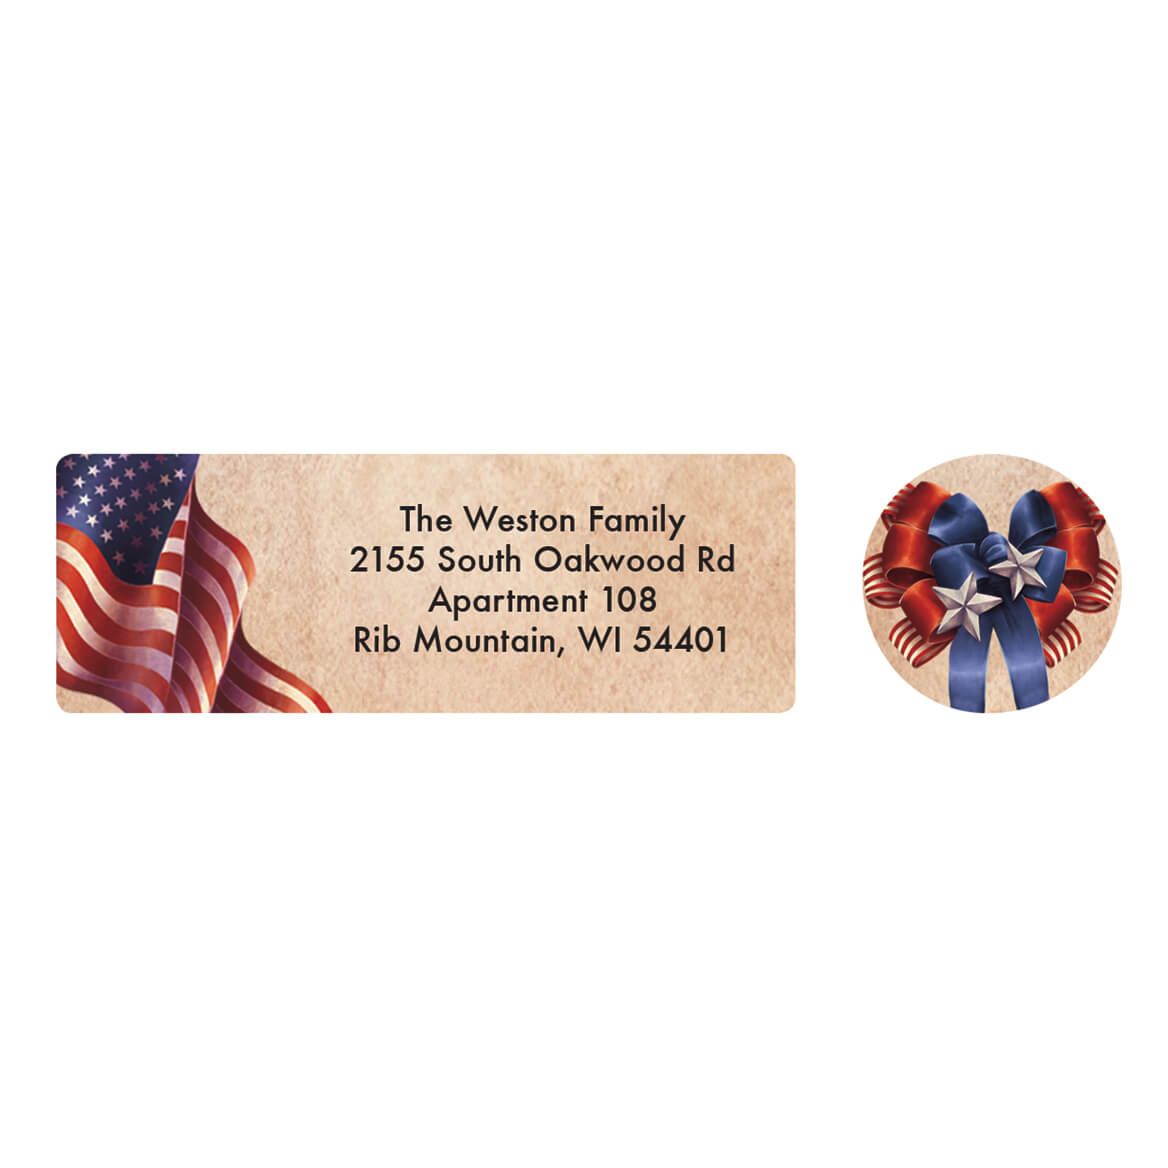 Personalized Patriotic Blessings Address Labels & Seals 20 + '-' + 364723